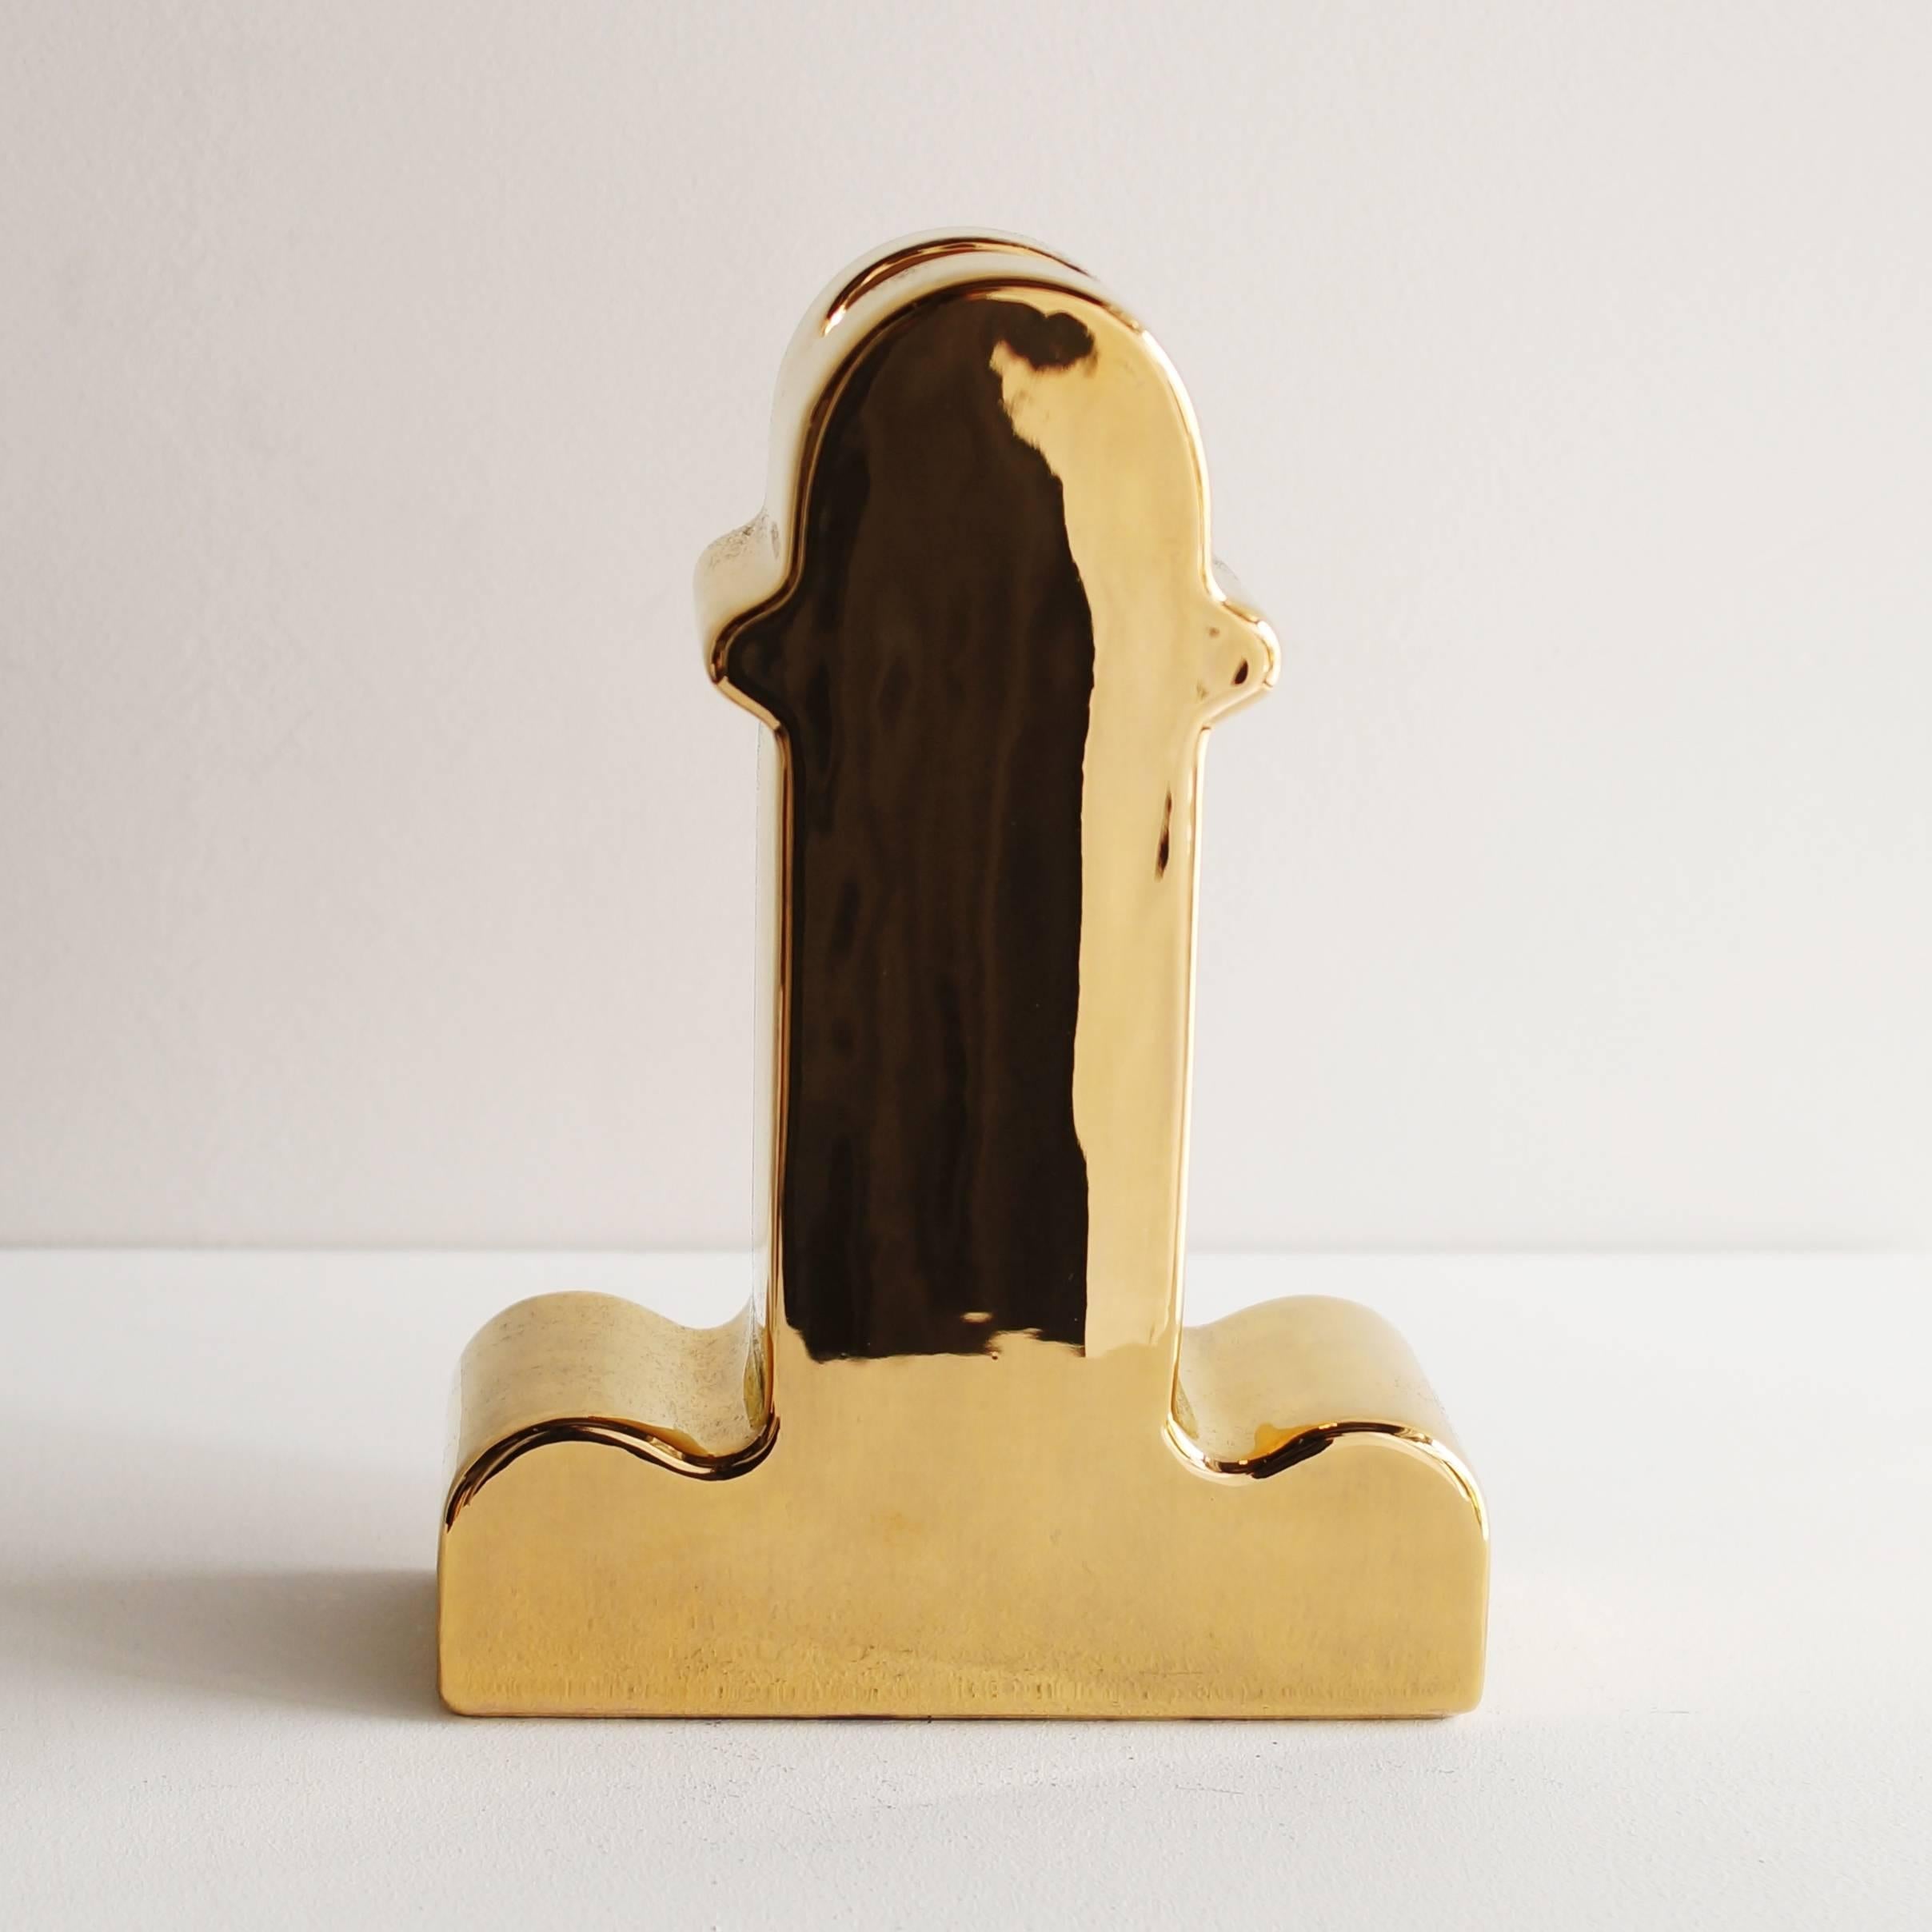 Shiva gold limited edition. Number is 37 of 50. Ettore Sottsass. 12-karat gold painted with black special box and 